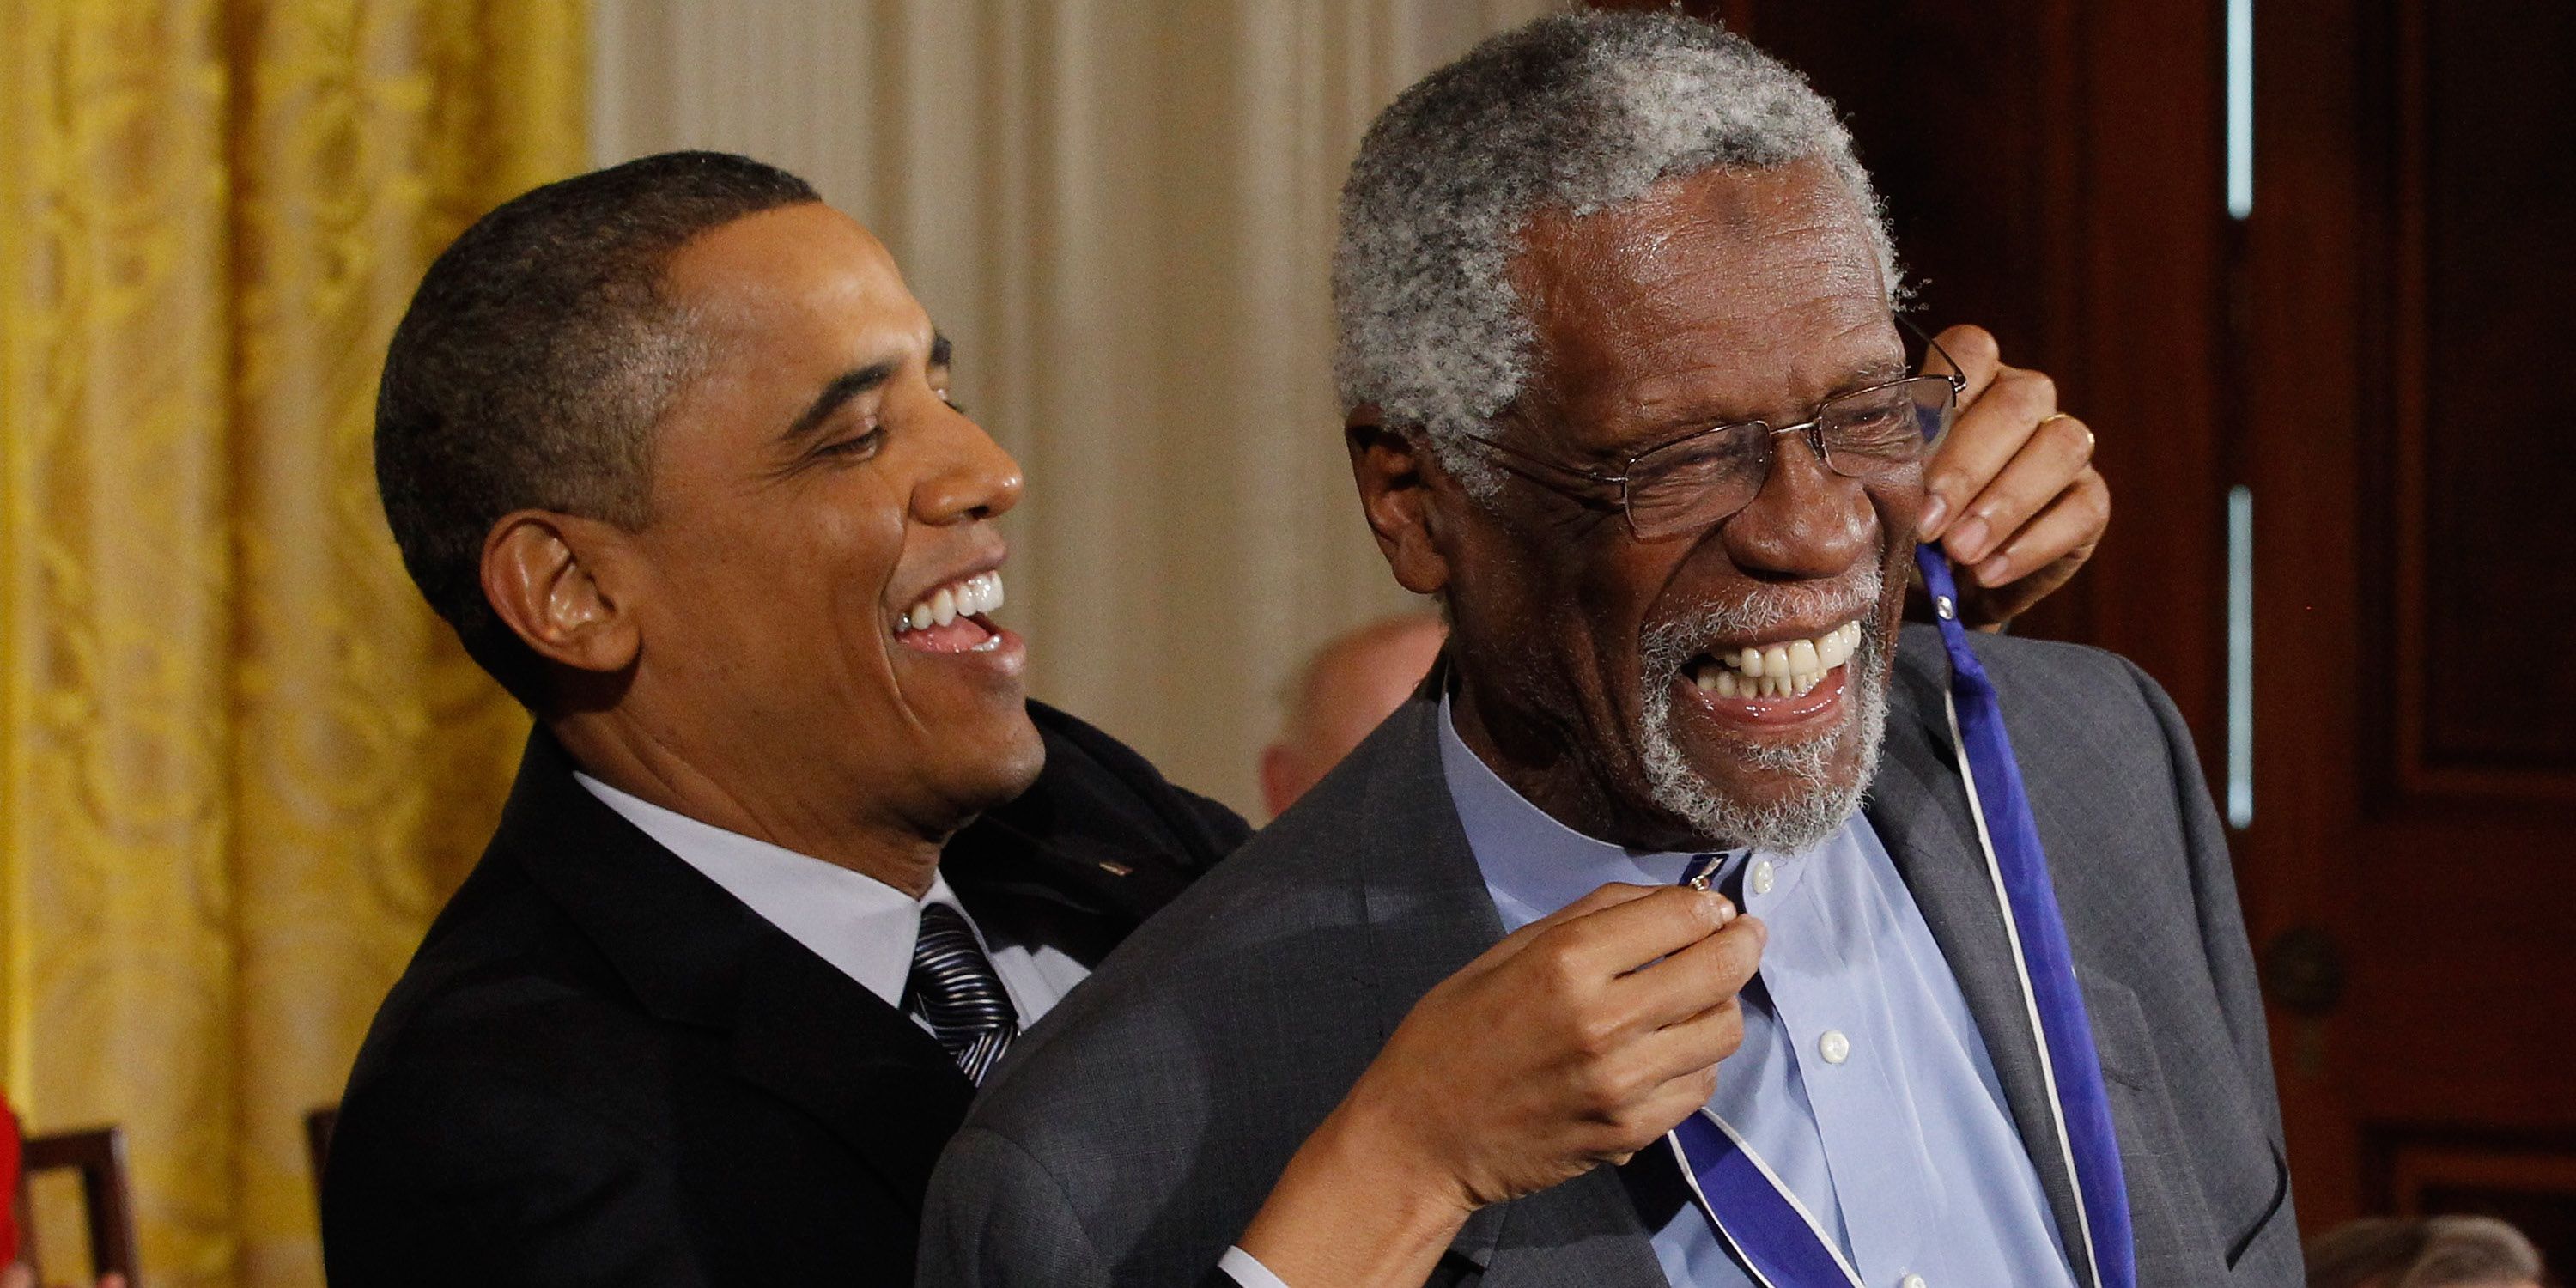 Bill Russell receives the medal of freedom from Obama.